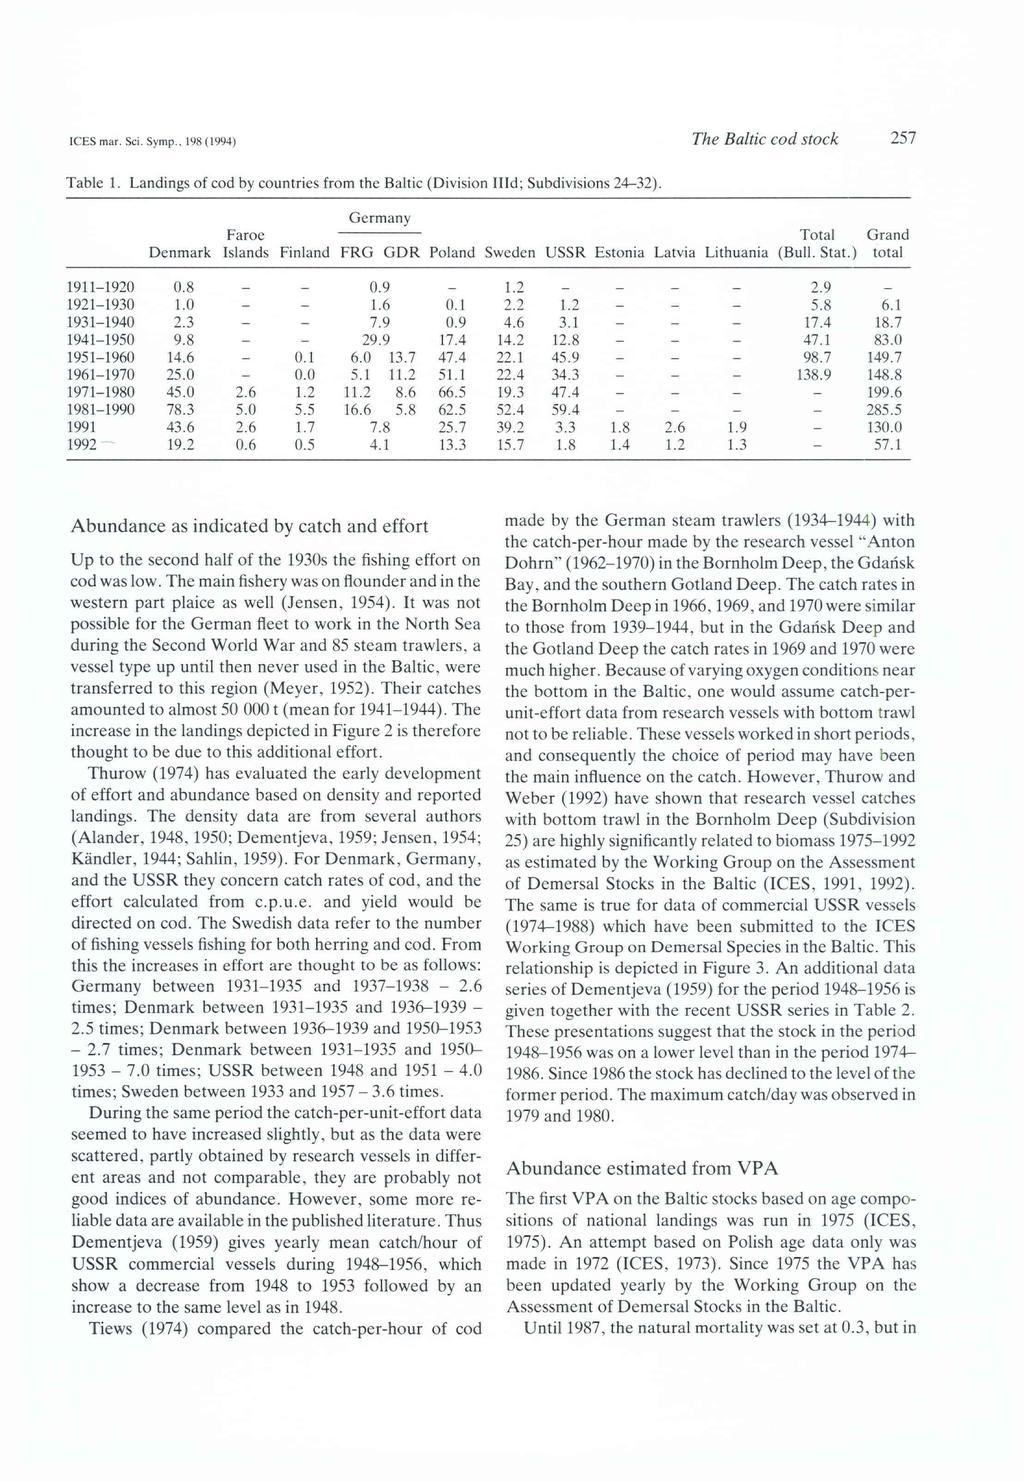 ICES mar. Sei. Symp.. 198 (1994) The Baltic Cod Stock 257 Table 1. Landings of cod by countries from the Baltic (Division Illd; Subdivisions 24-32).